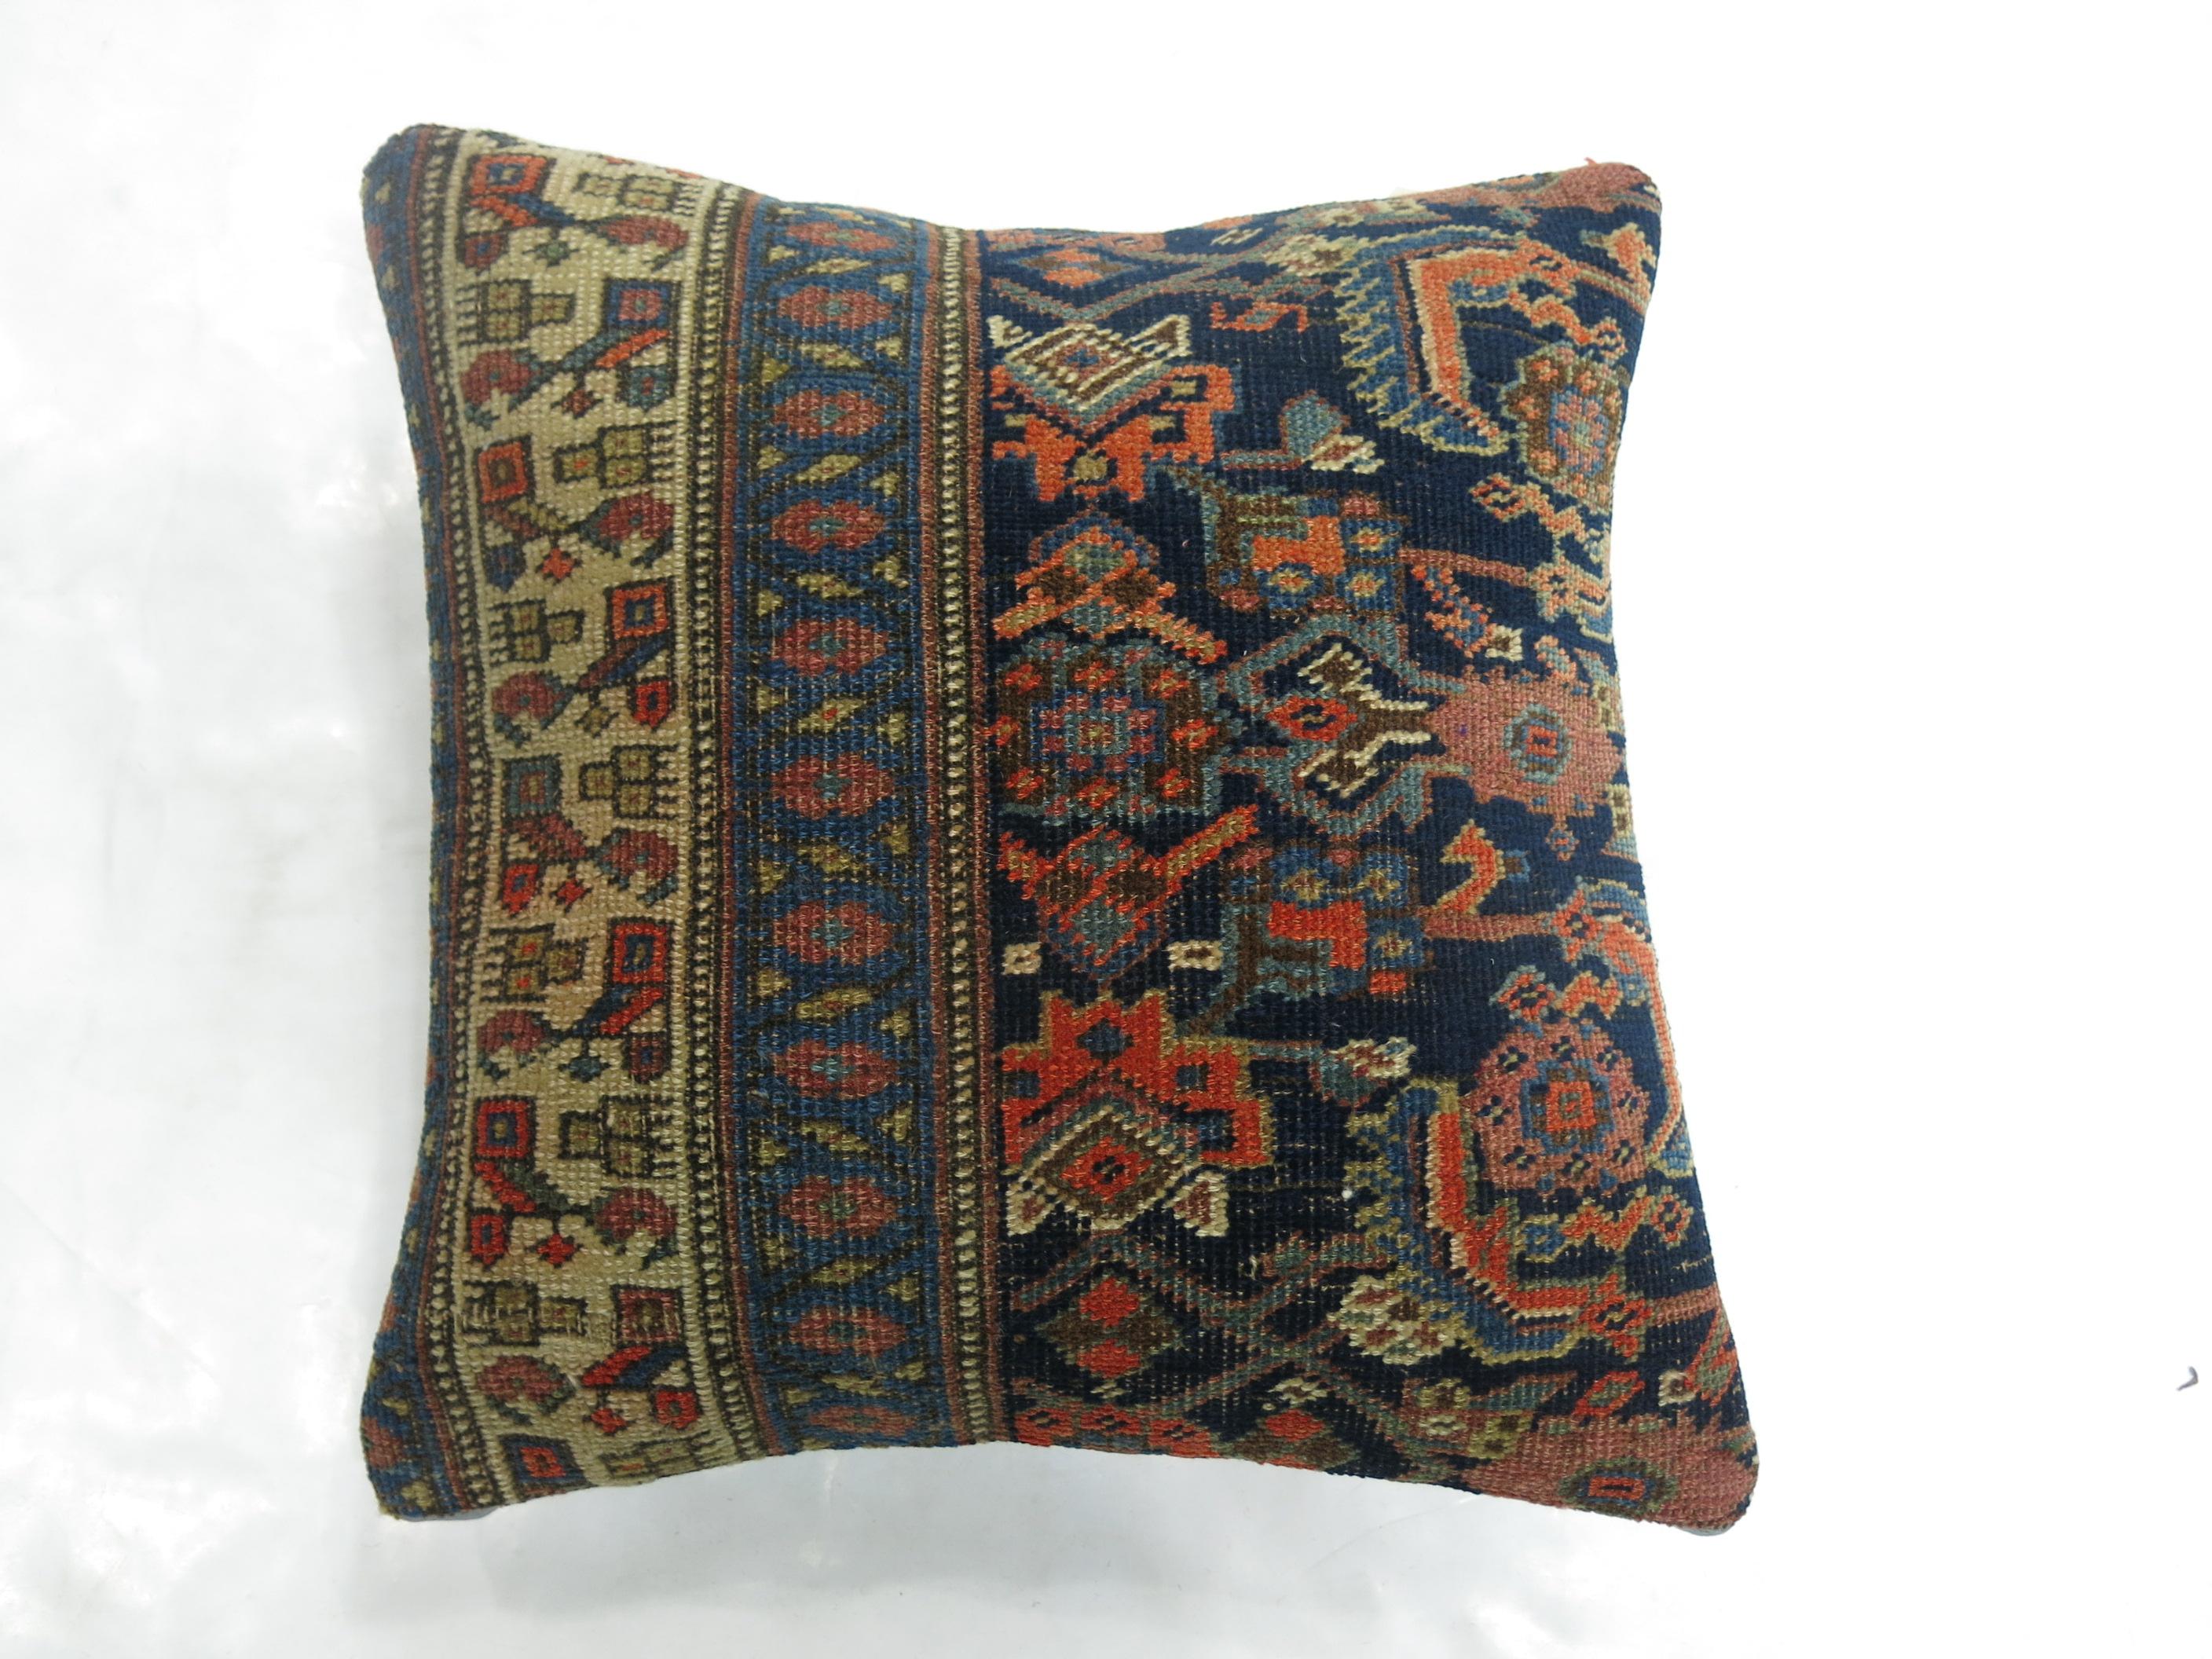 Pillow made from a turn-of-the-century Persian Bidjar rug. Polyfill insert and zipper closure included

Measures: 17'' x 17''.